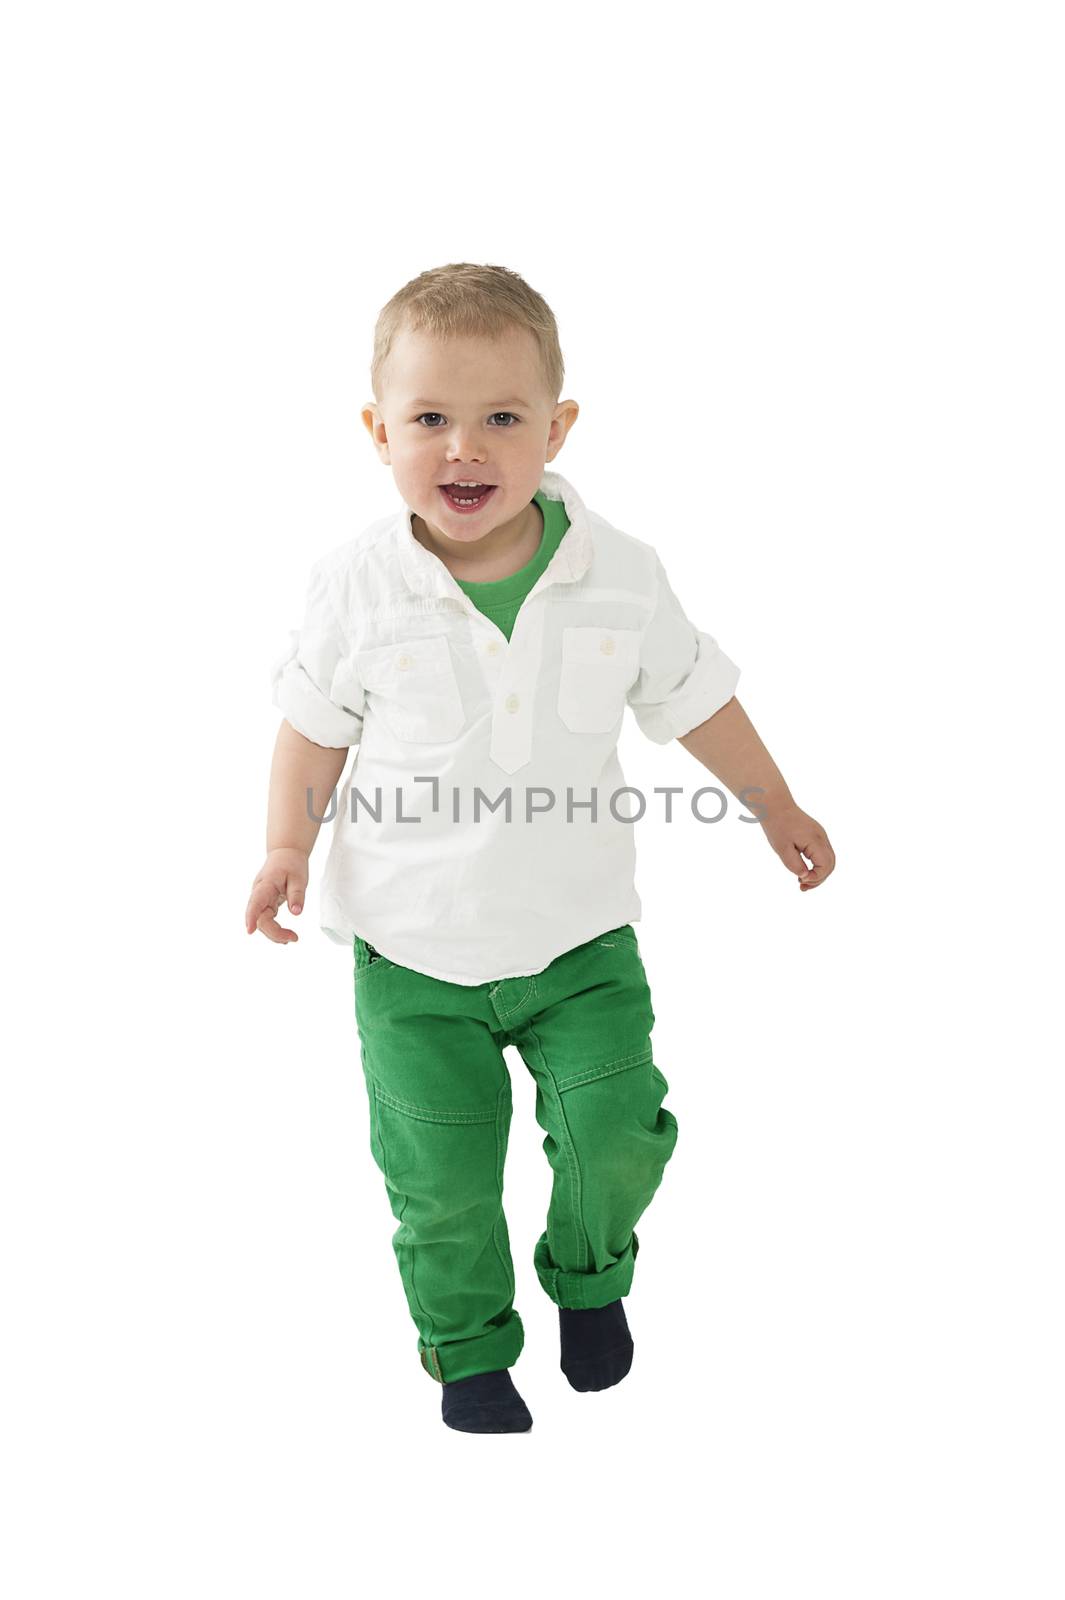 Handsome little blond boy approaching the camera walking in mid stride with a cheerful friendly smile isolated on white